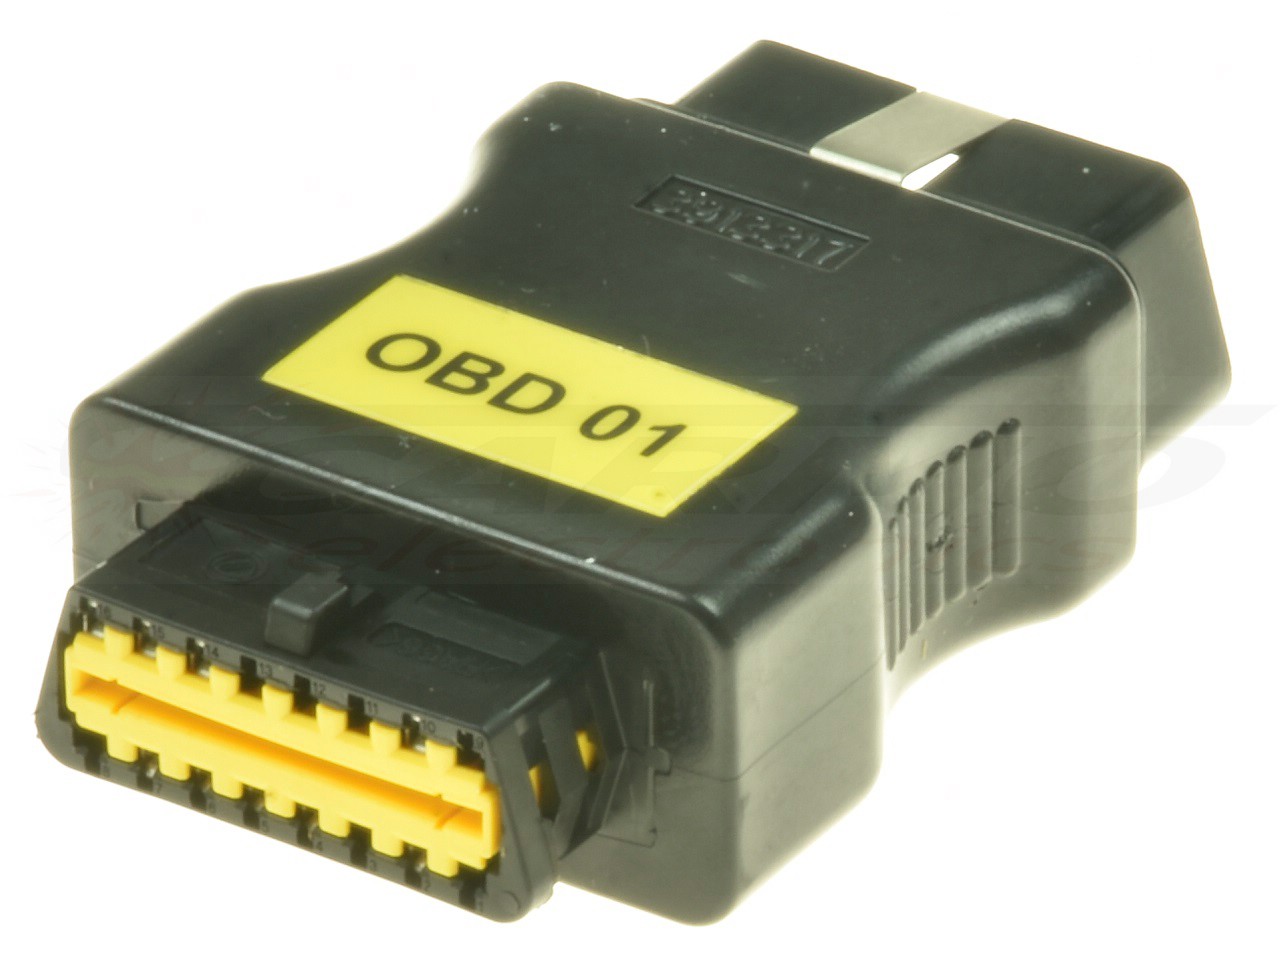 OBD01 Motorcycle OBD adapter for diagnosing CFMOTO motorbikes and quads TEXA-3913317 - Click Image to Close